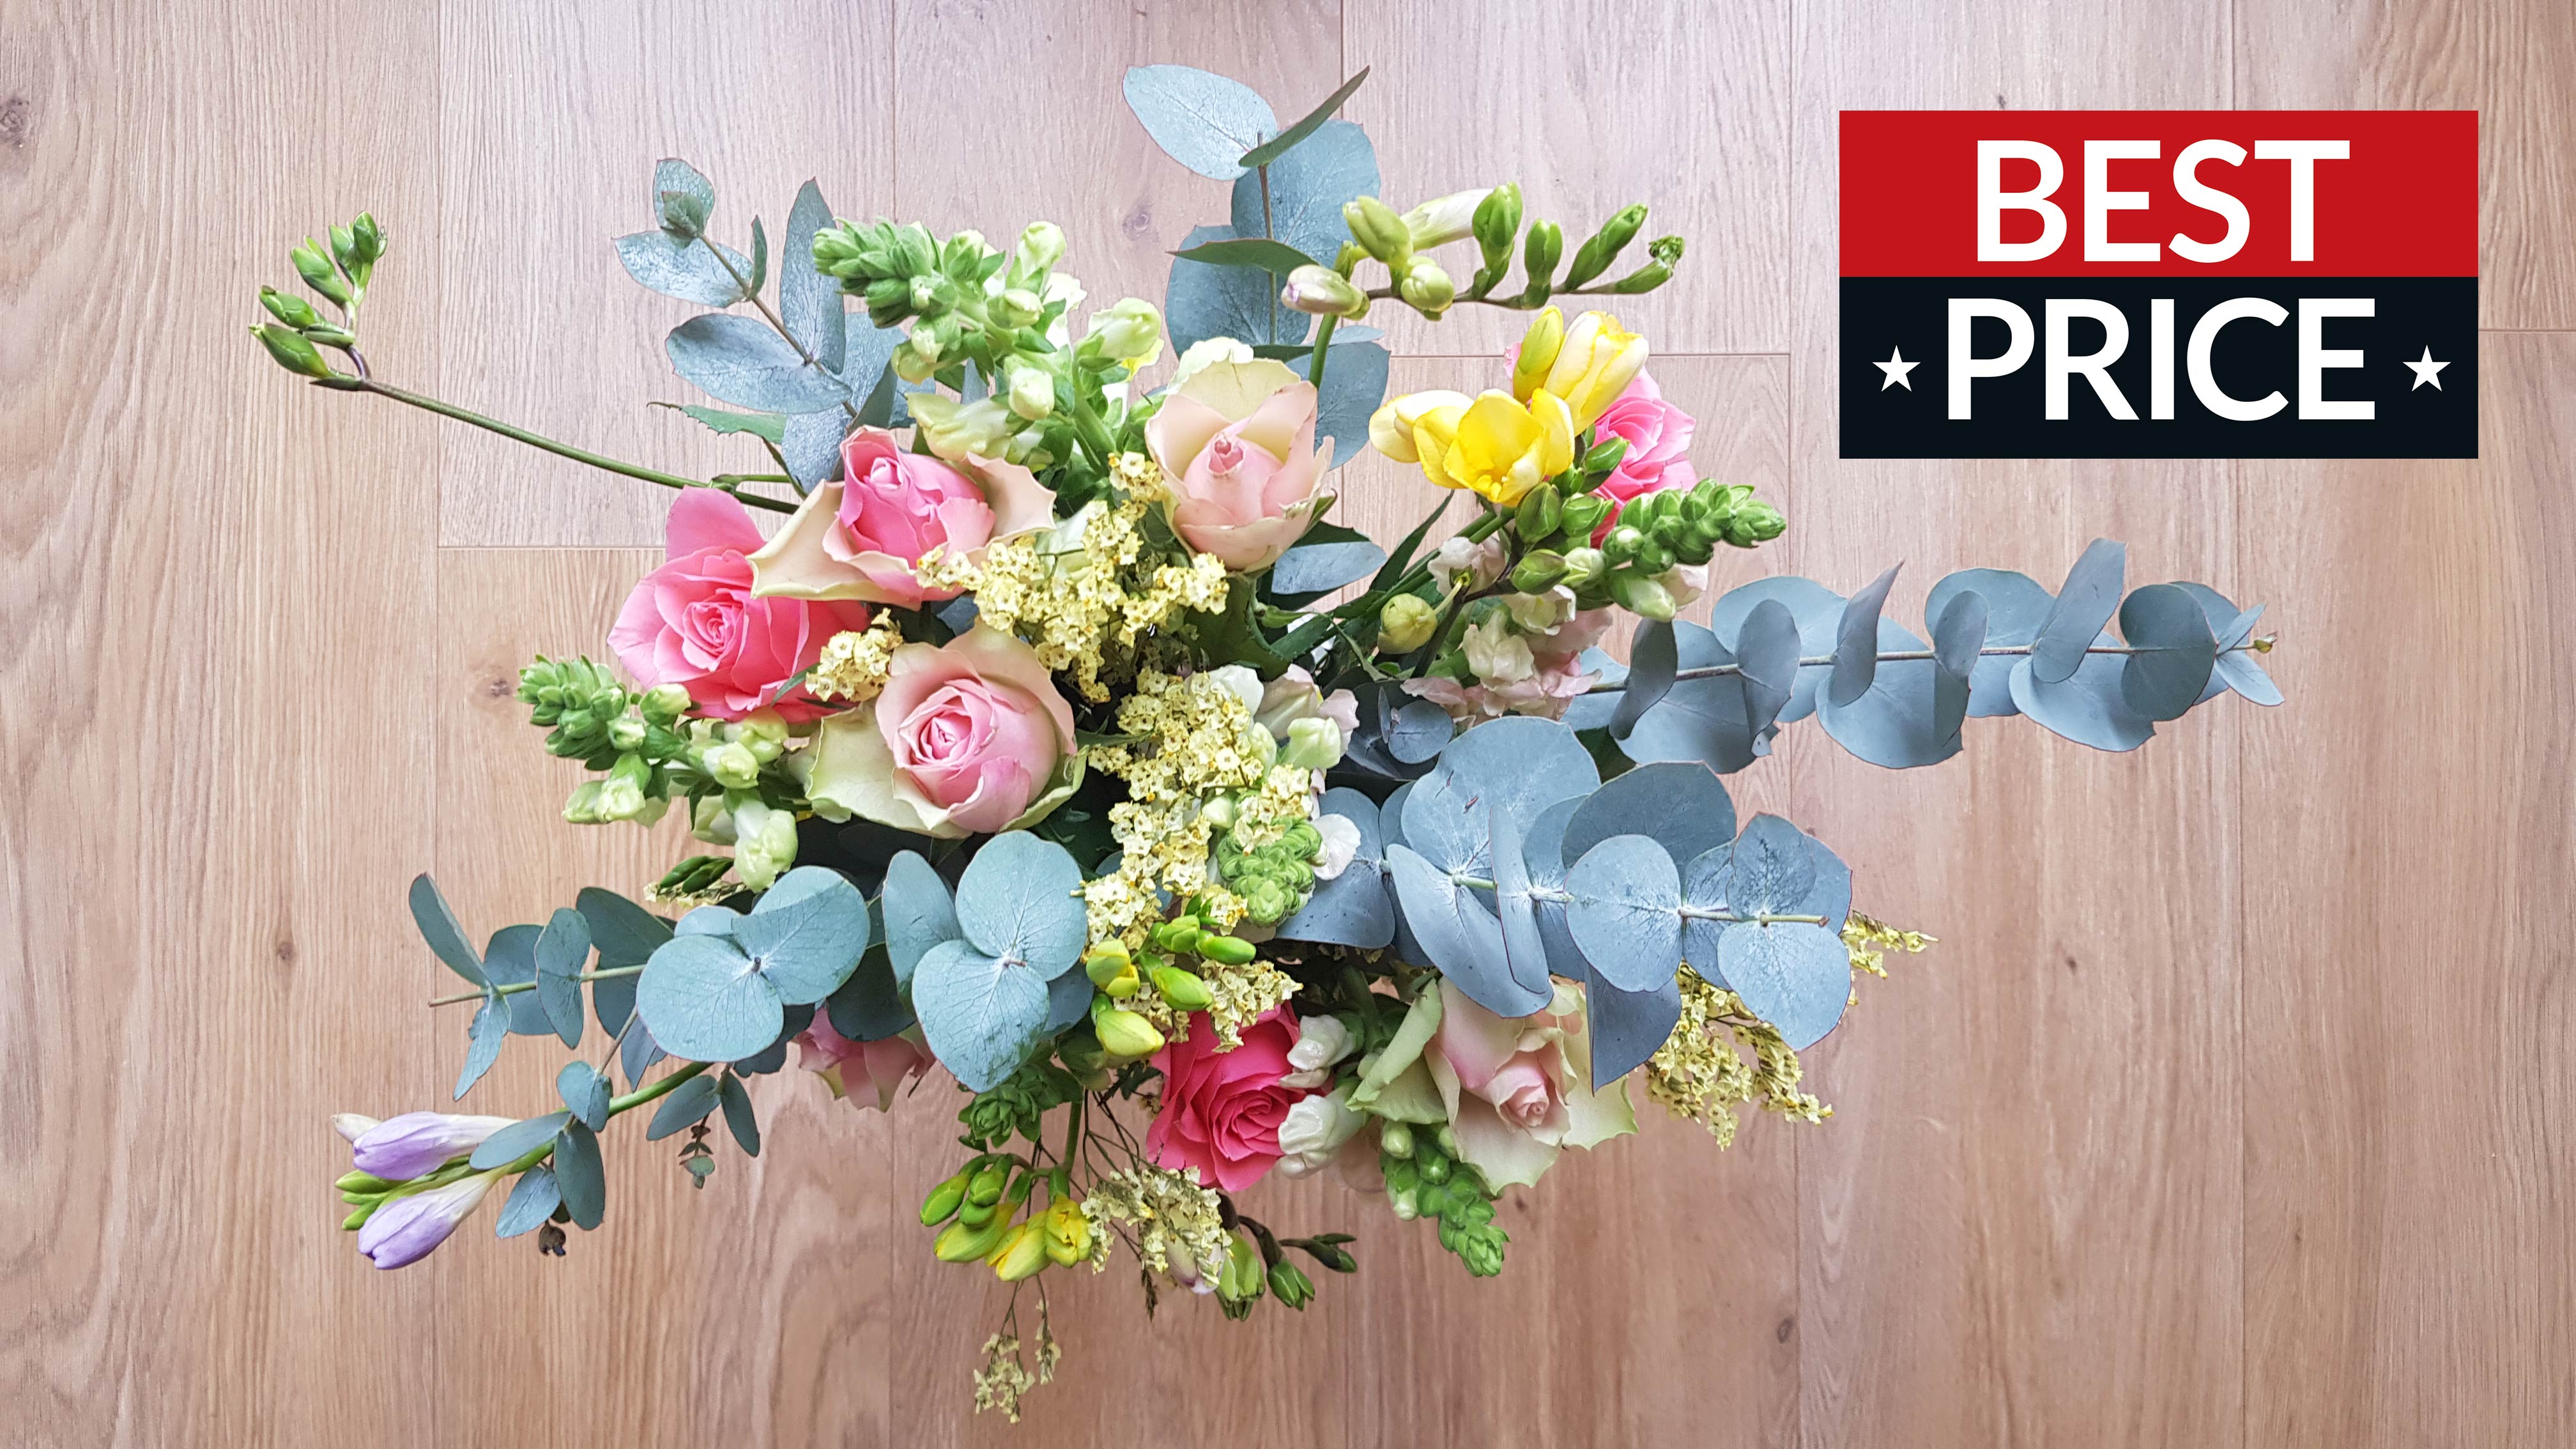 mother's day flower delivery deals